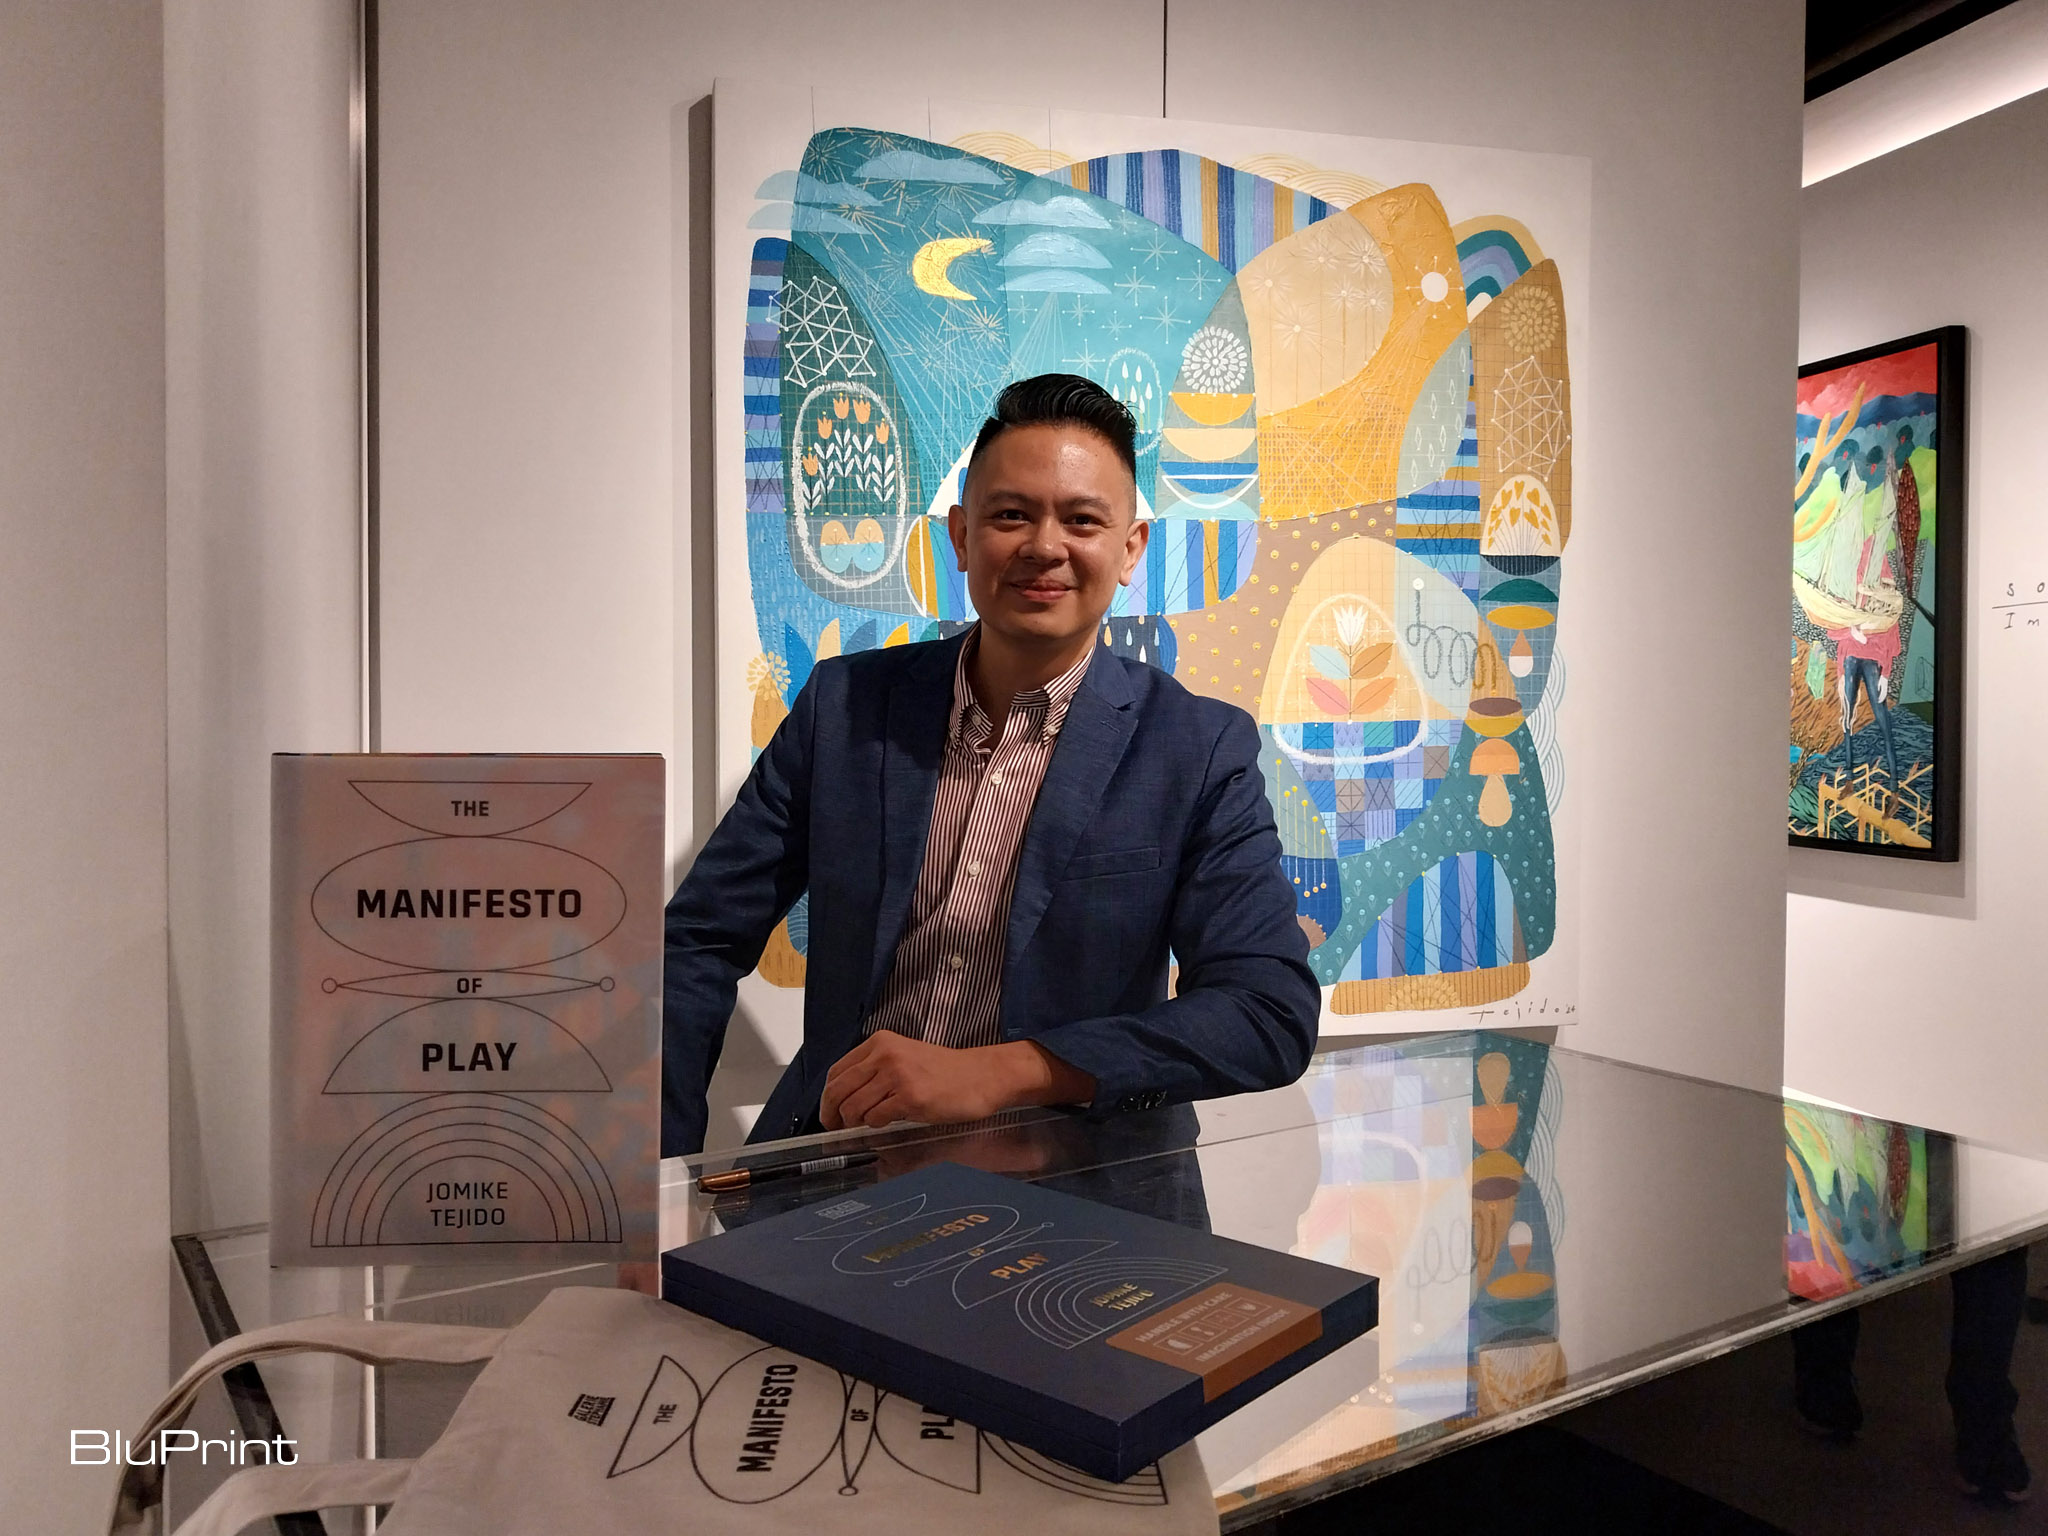 Jomike Tejido and his new book and exhibit "Manifesto of Play." Photo by Elle Yap.